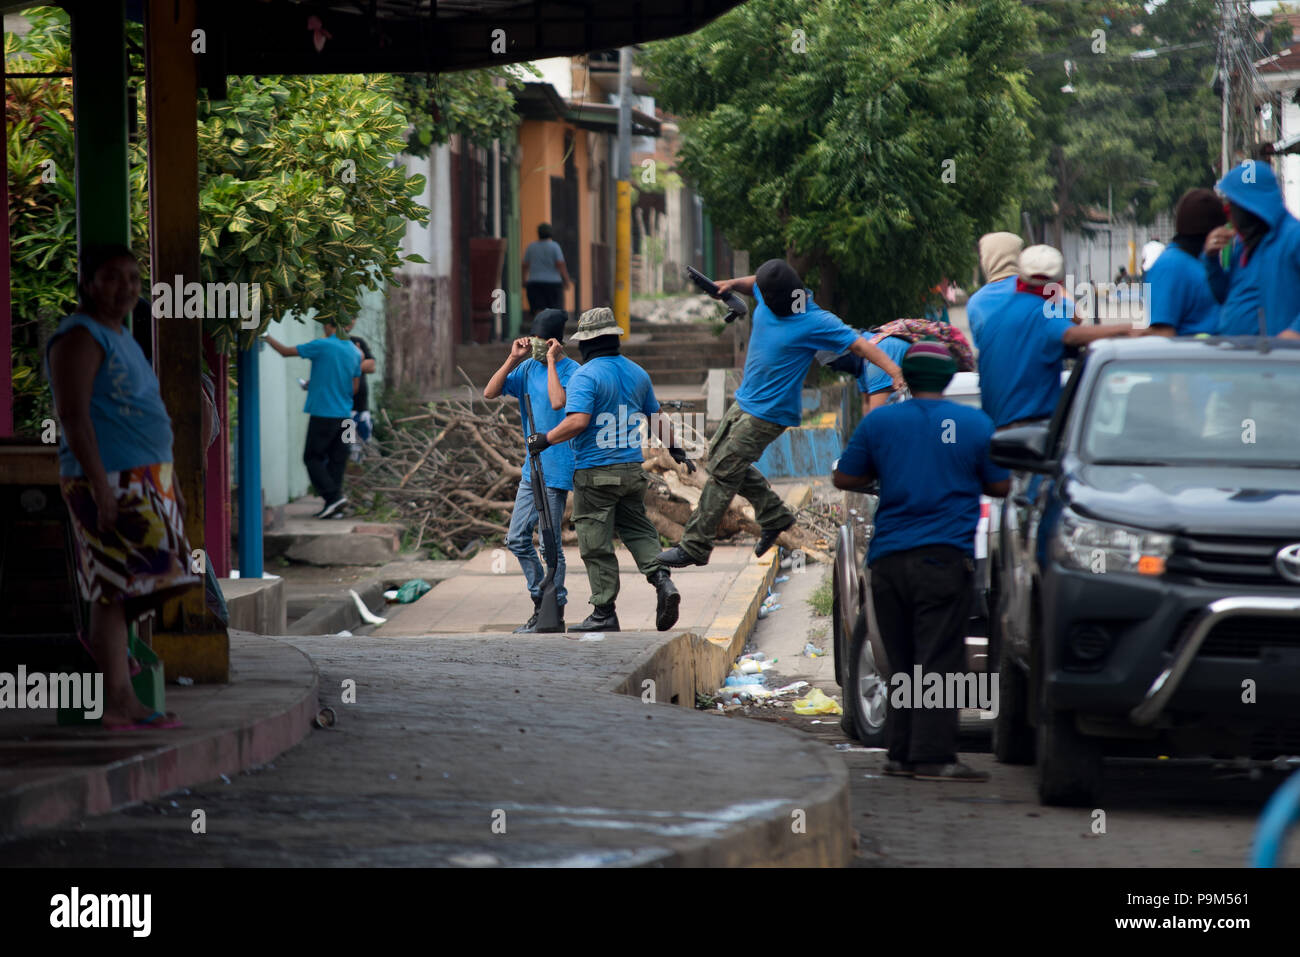 Masaya, Nicaragua. 18th July, 2018. Numerous masked and armed men get out of a car. Paramilitary and pro-government groups have launched an attack on the Masaya opposition stronghold. At least three people were killed. According to human rights activists, the conflict, which has been ongoing since mid-April, has already killed more than 300 people in the Central American country, with the government claiming about 50 deaths. The demonstrators demand the resignation of President Ortega and an end to violence and a free press. Credit: Carlos Herrera/dpa/Alamy Live News Stock Photo